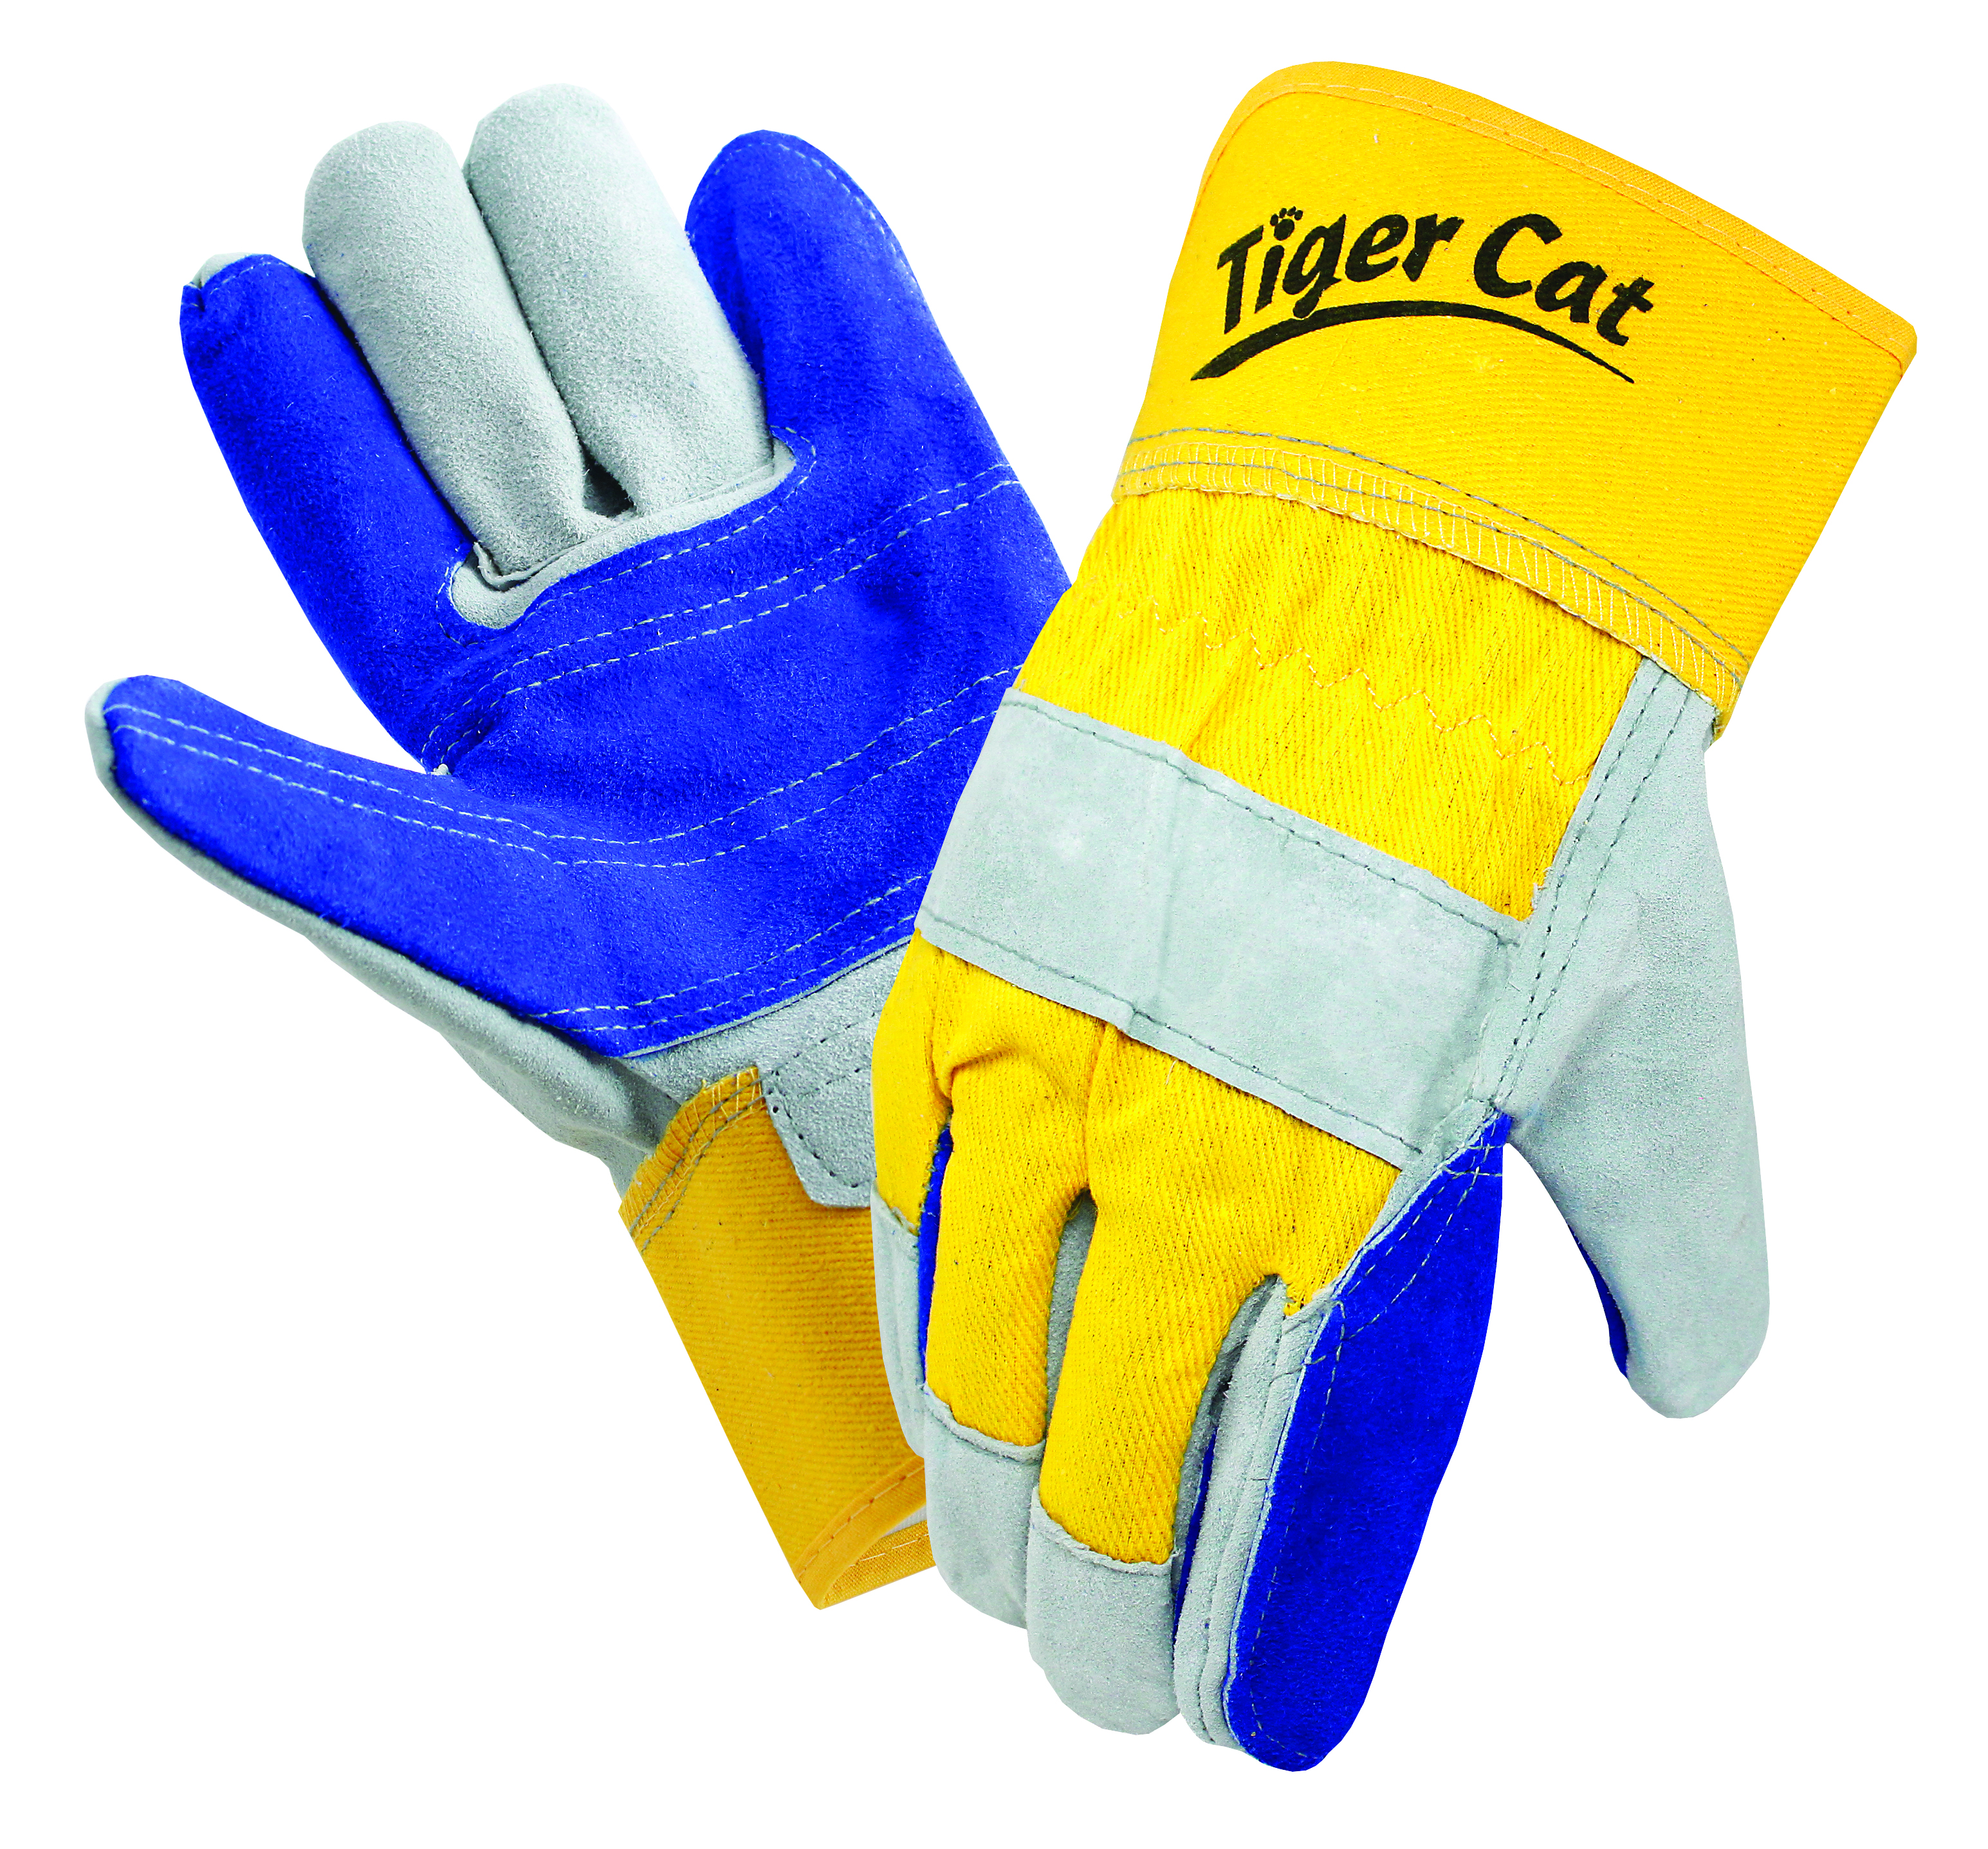 Tiger Cat&trade; Premium Leather Double Palm Gloves w/ Safety Cuff